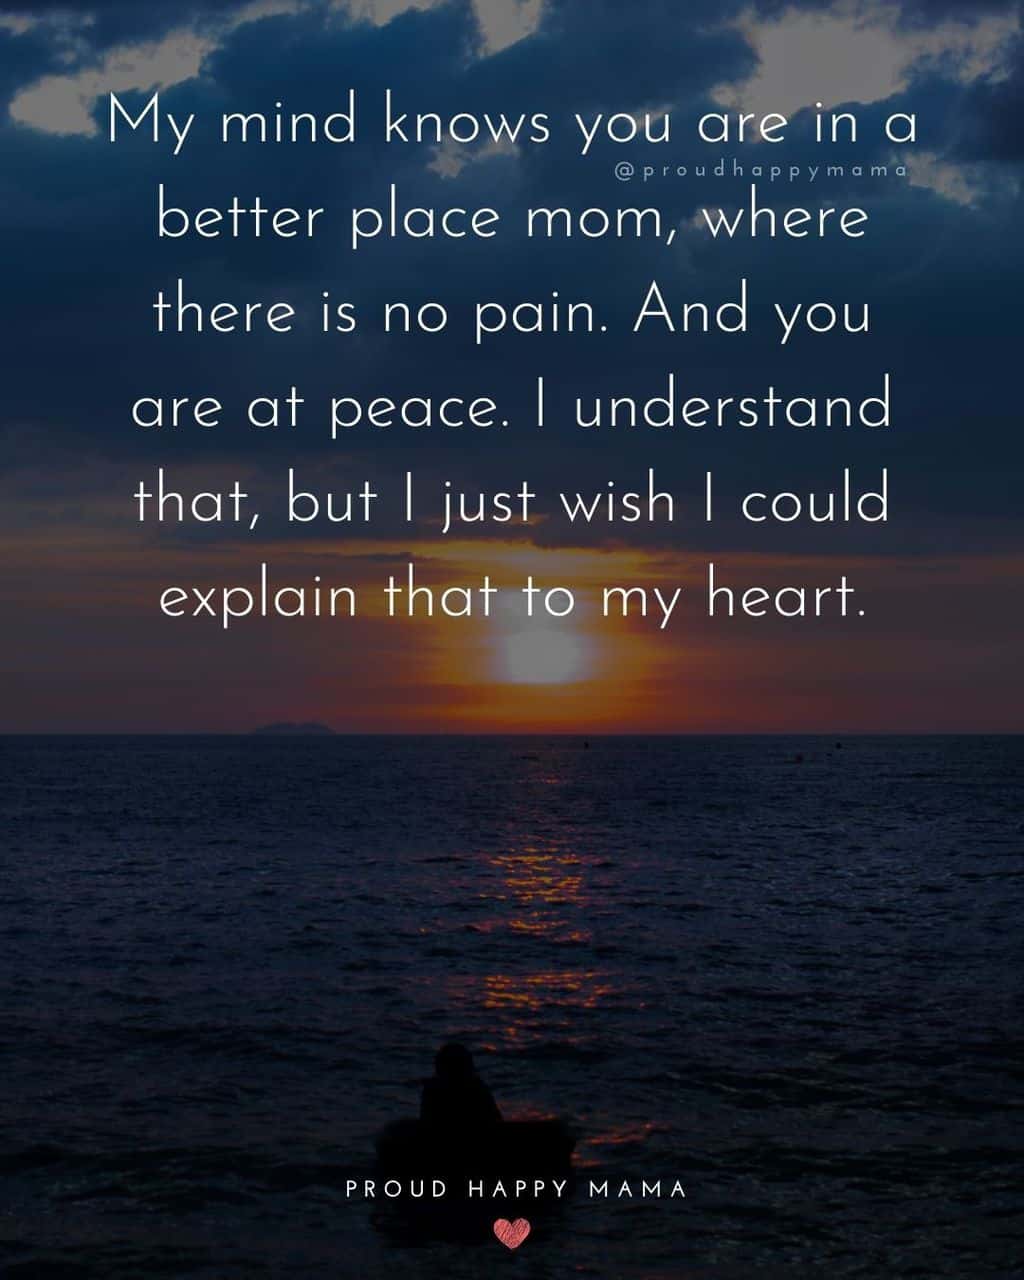 Person in small boat with sun setting over the ocean with text overlay, ‘My mind knows you are in a better place mom, where there is no pain. And you are at peace. I understand that, but I just wish I could explain that to my heart.’ 